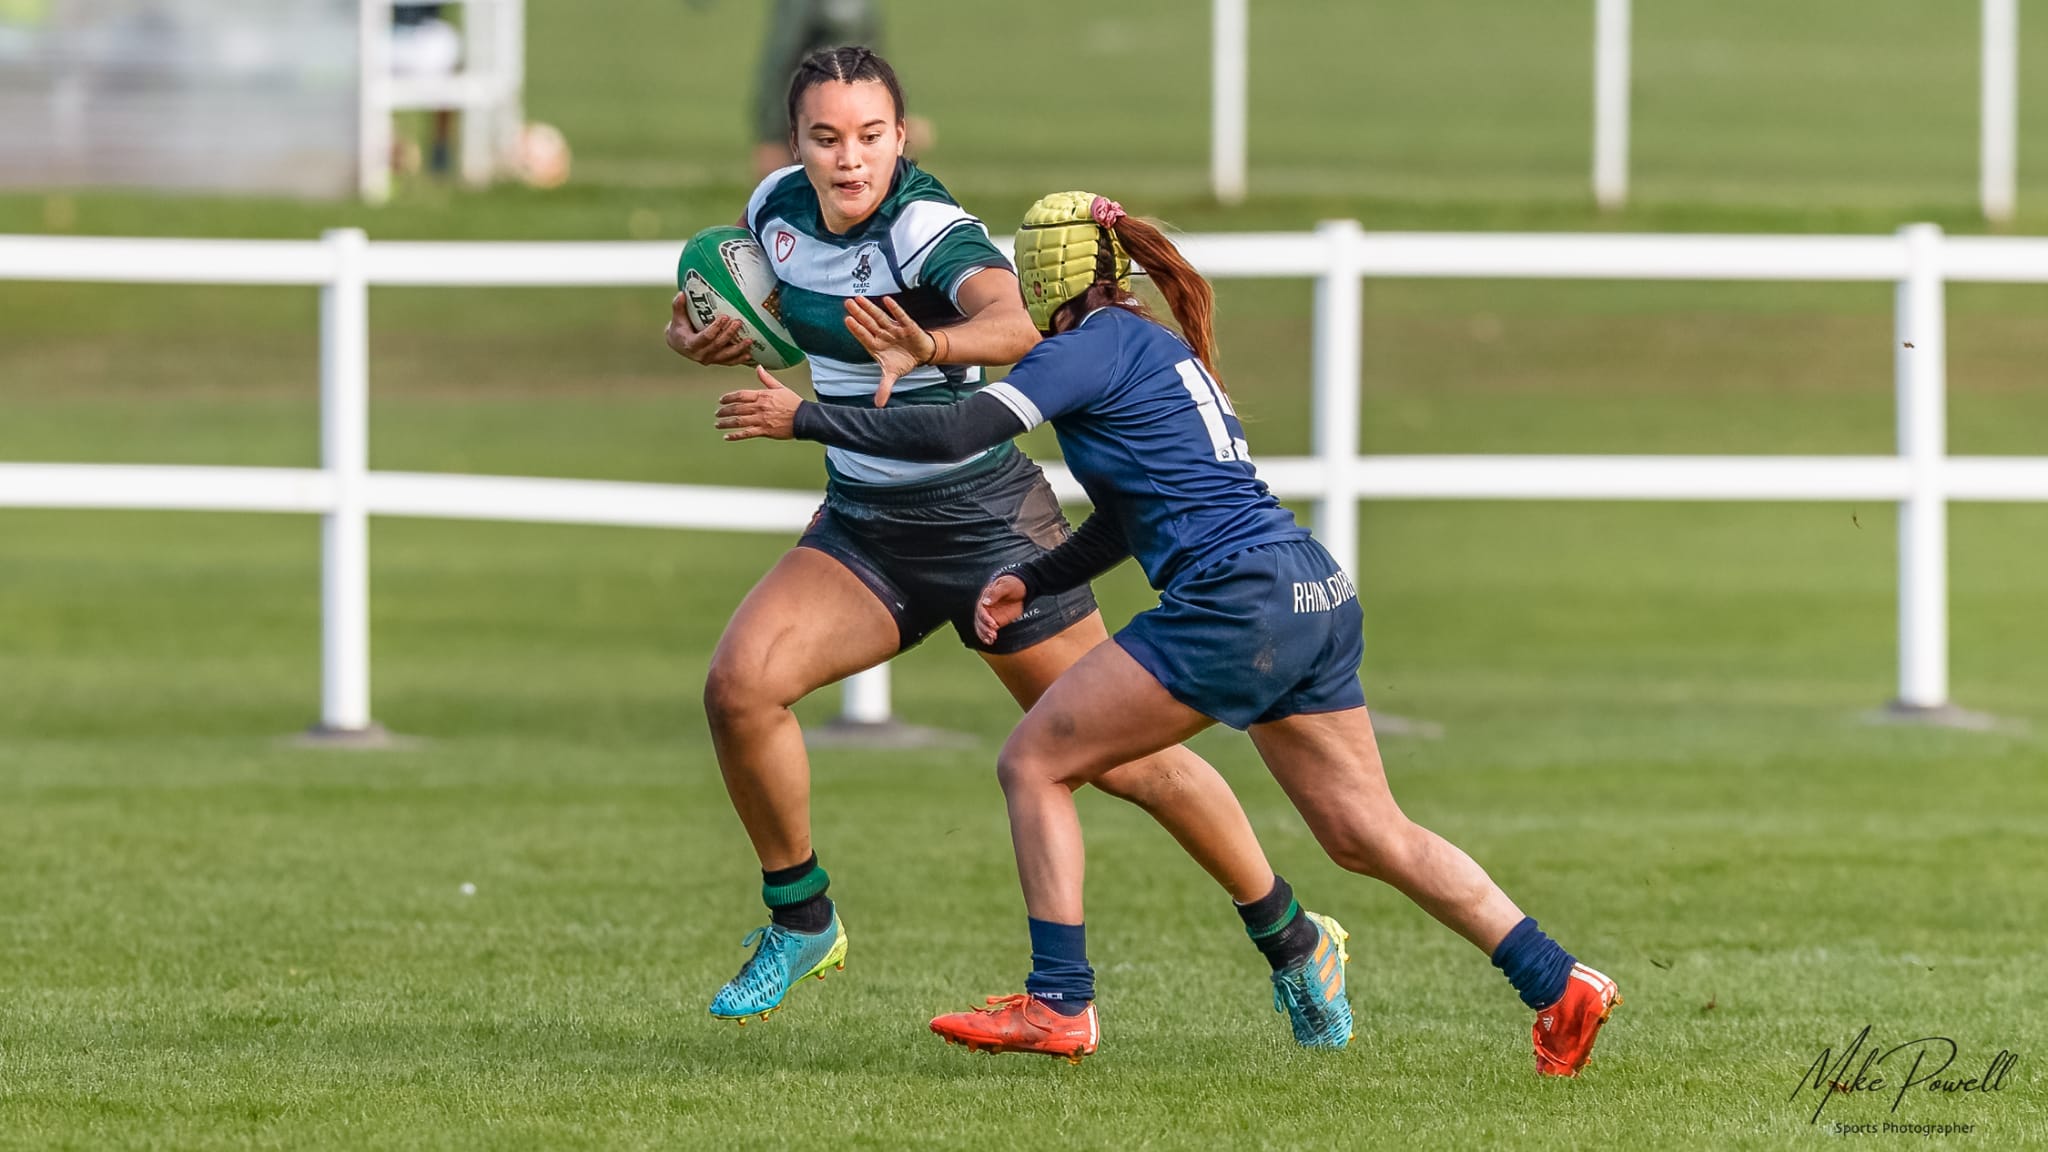 University of Exeter representation in the England Women’s training squad.